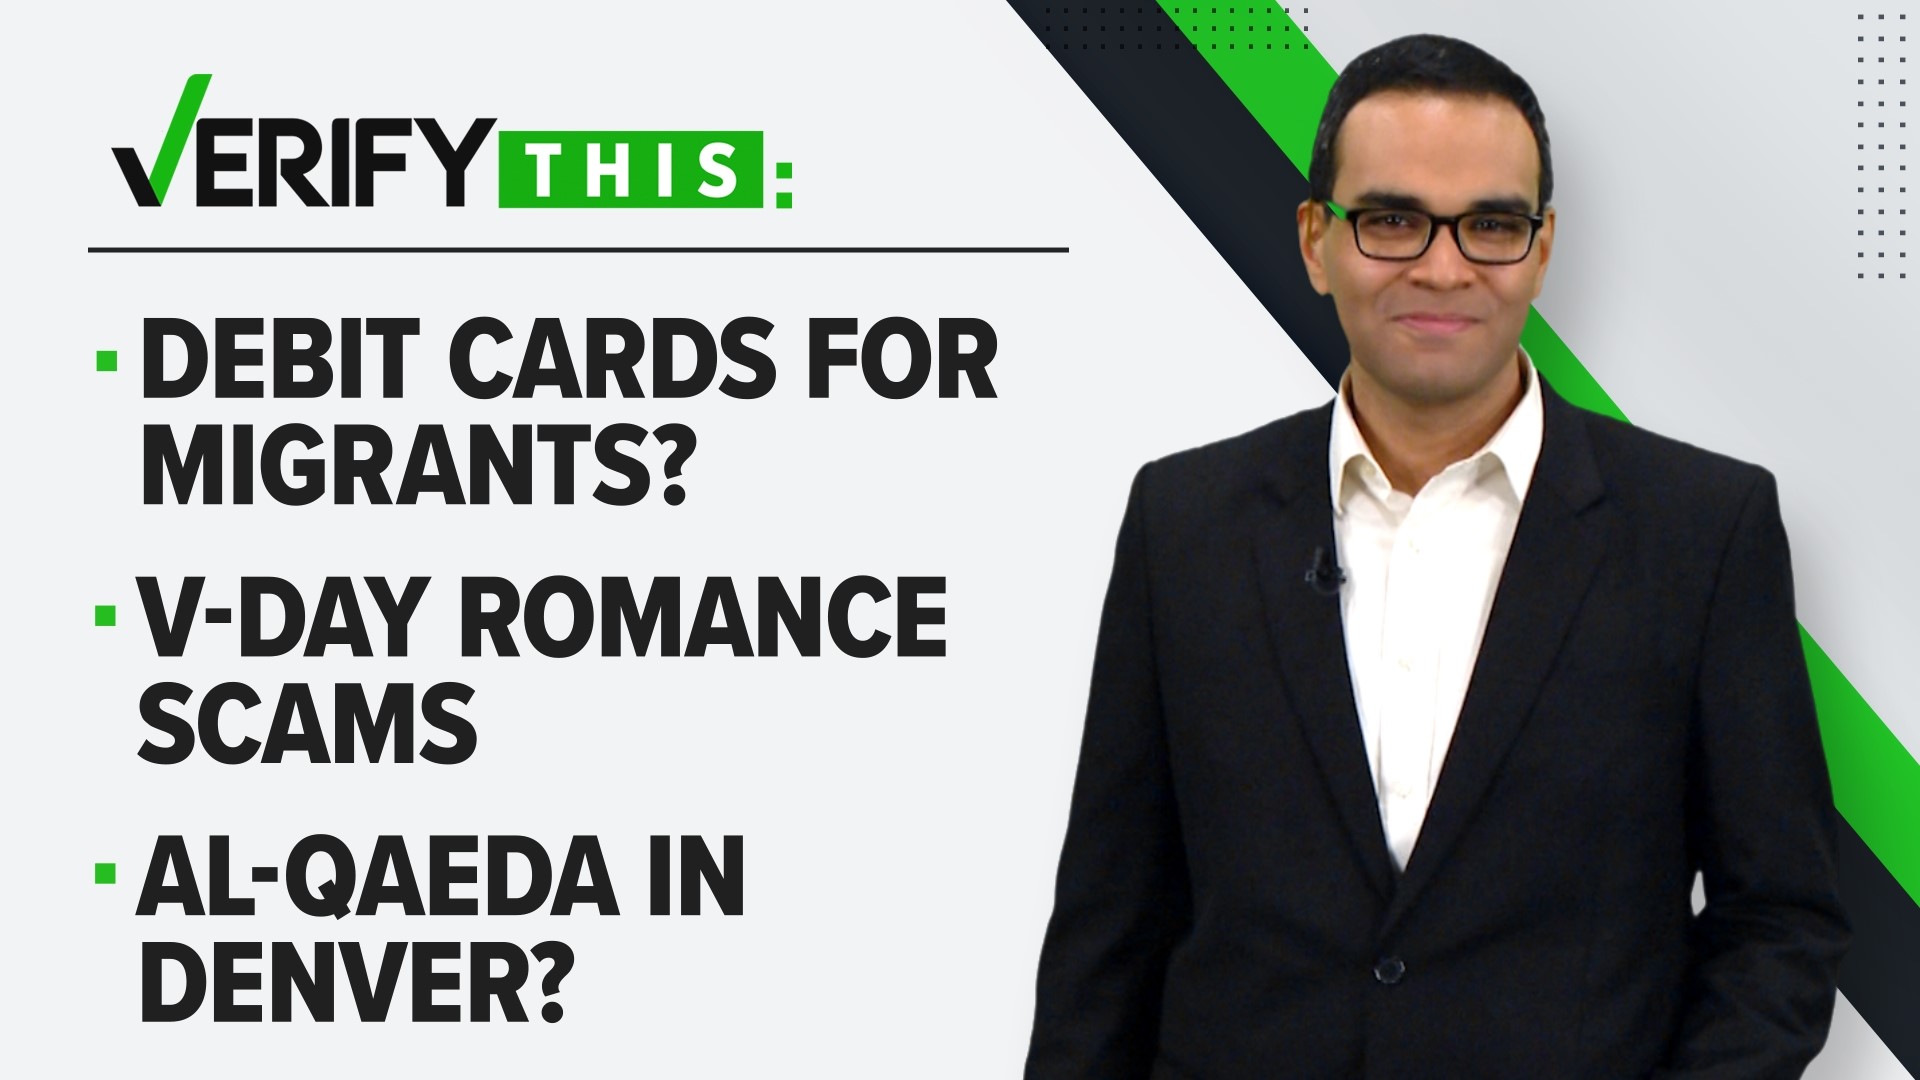 In this week's episode, we look into claims that people say they owe more taxes due to a law, explain a new romance scam and if NY migrants are getting debit cards.